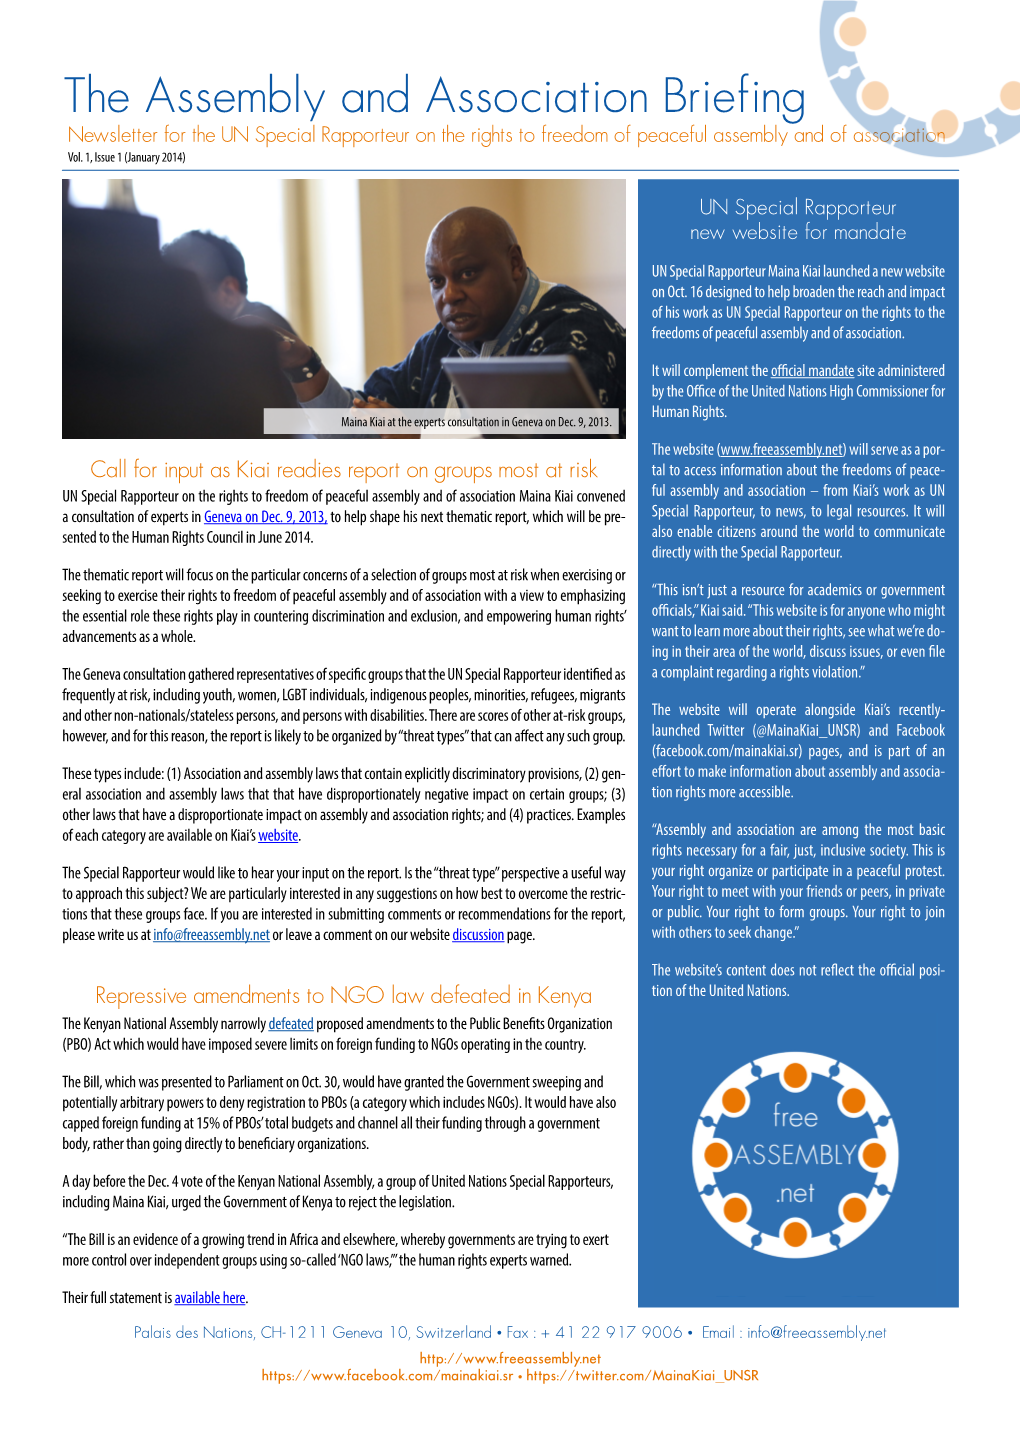 The Assembly and Association Briefing Newsletter for the UN Special Rapporteur on the Rights to Freedom of Peaceful Assembly and of Association Vol